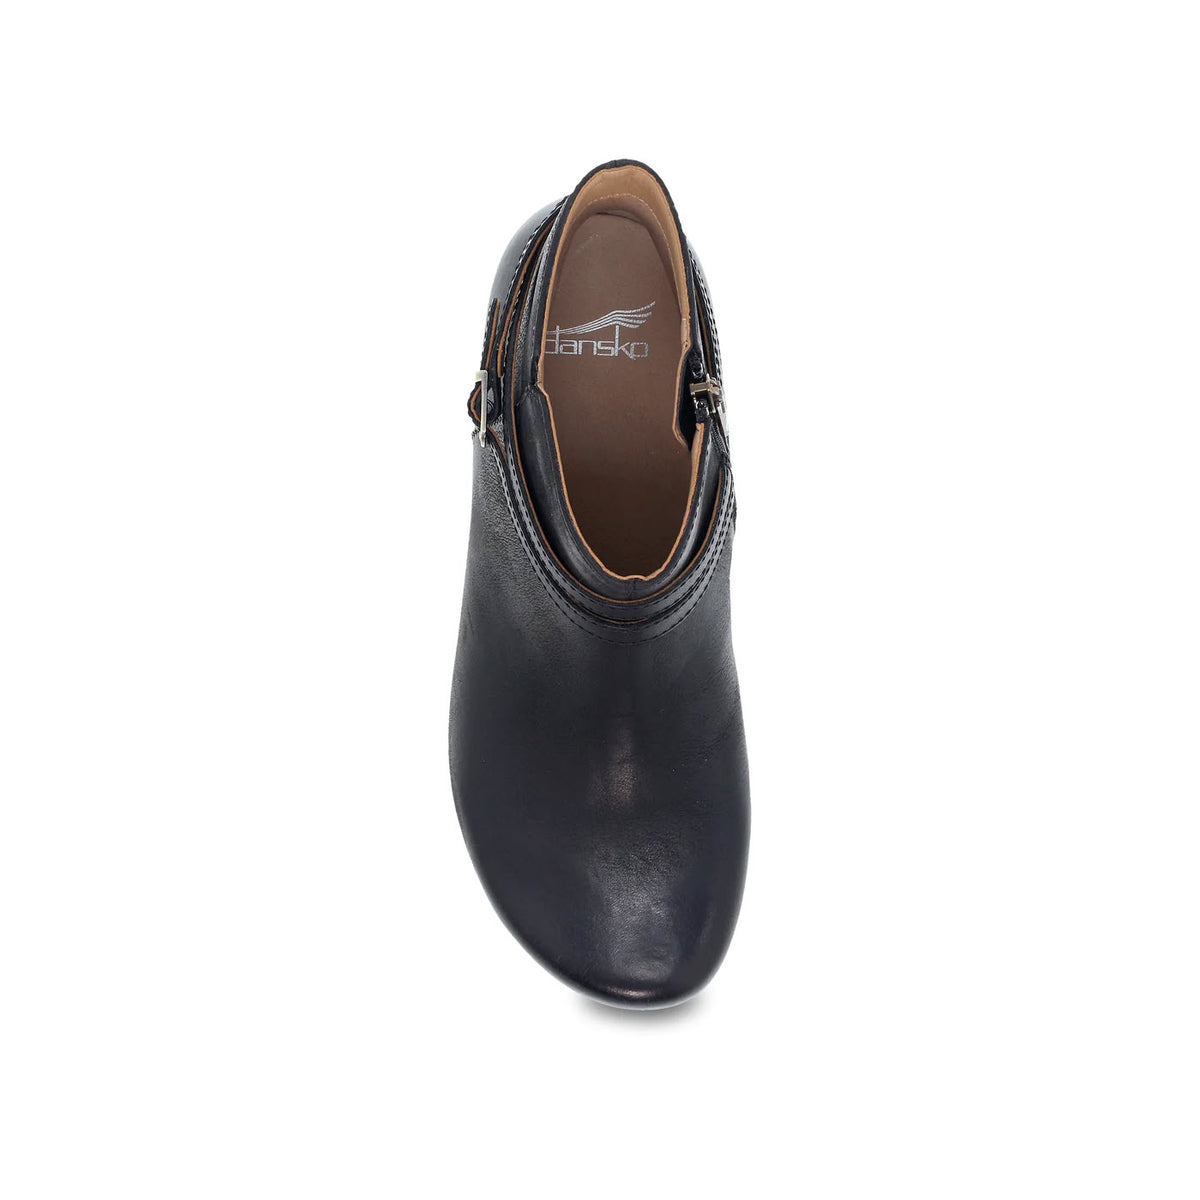 A DANSKO BROOK BLACK BURNISHED ankle bootie with a brown insole, view from the front and above, displaying the brand name &quot;dansko&quot; on the insole.